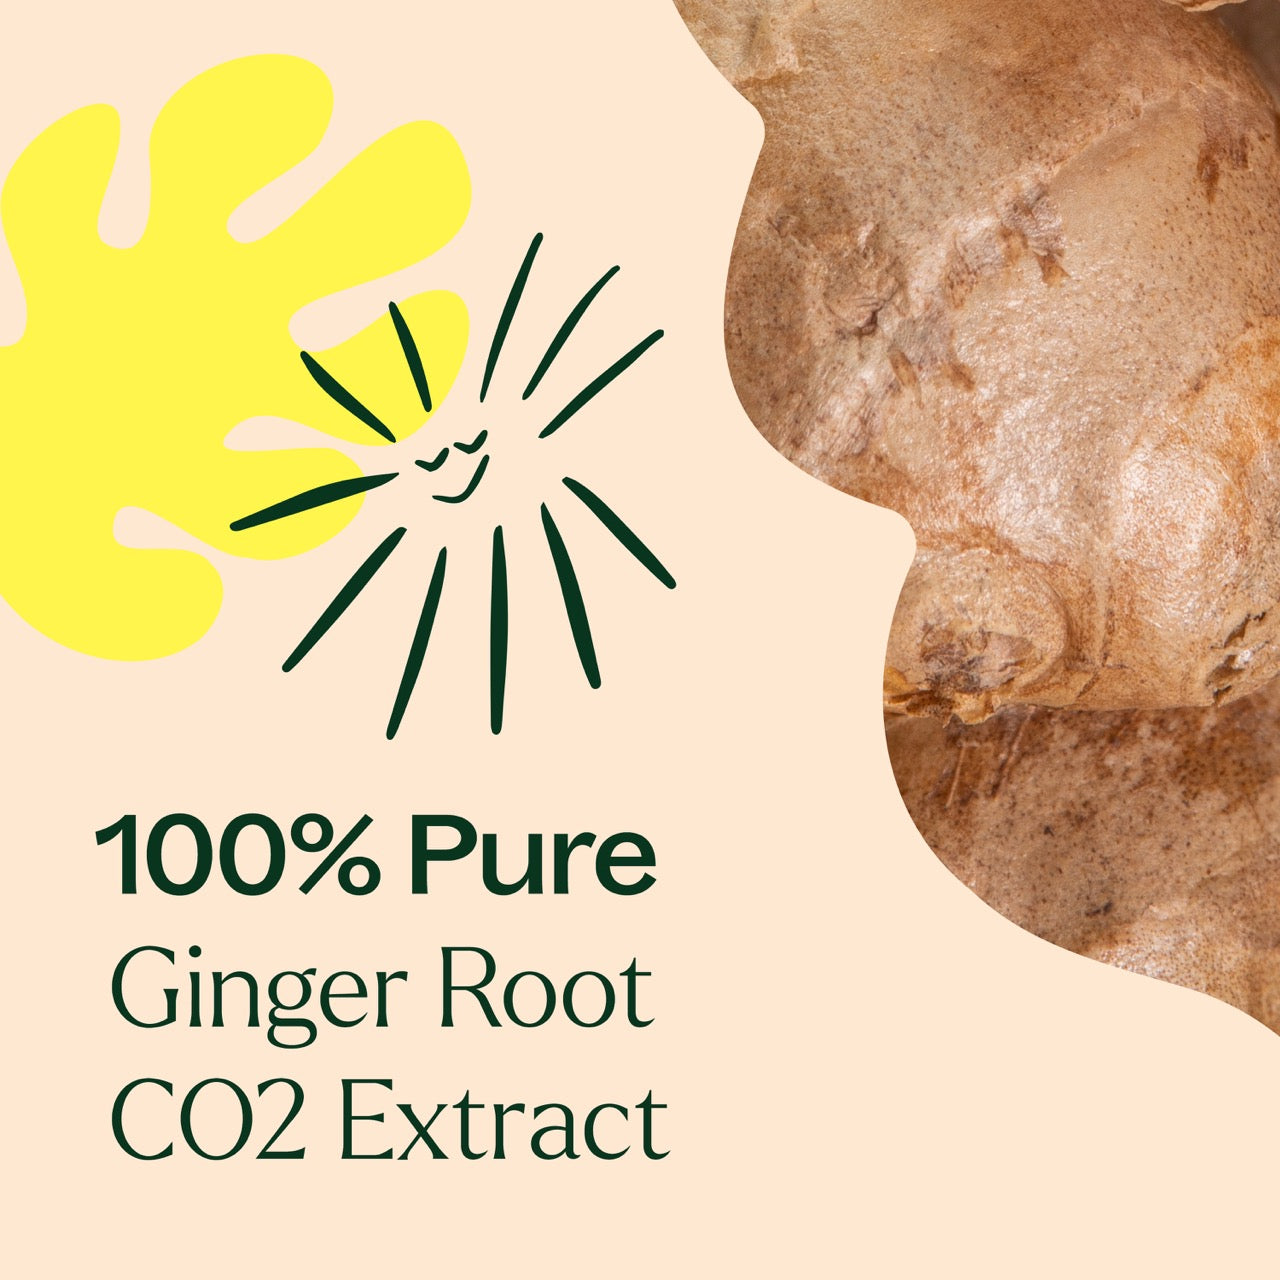 100% pure Ginger Root CO2 Extract